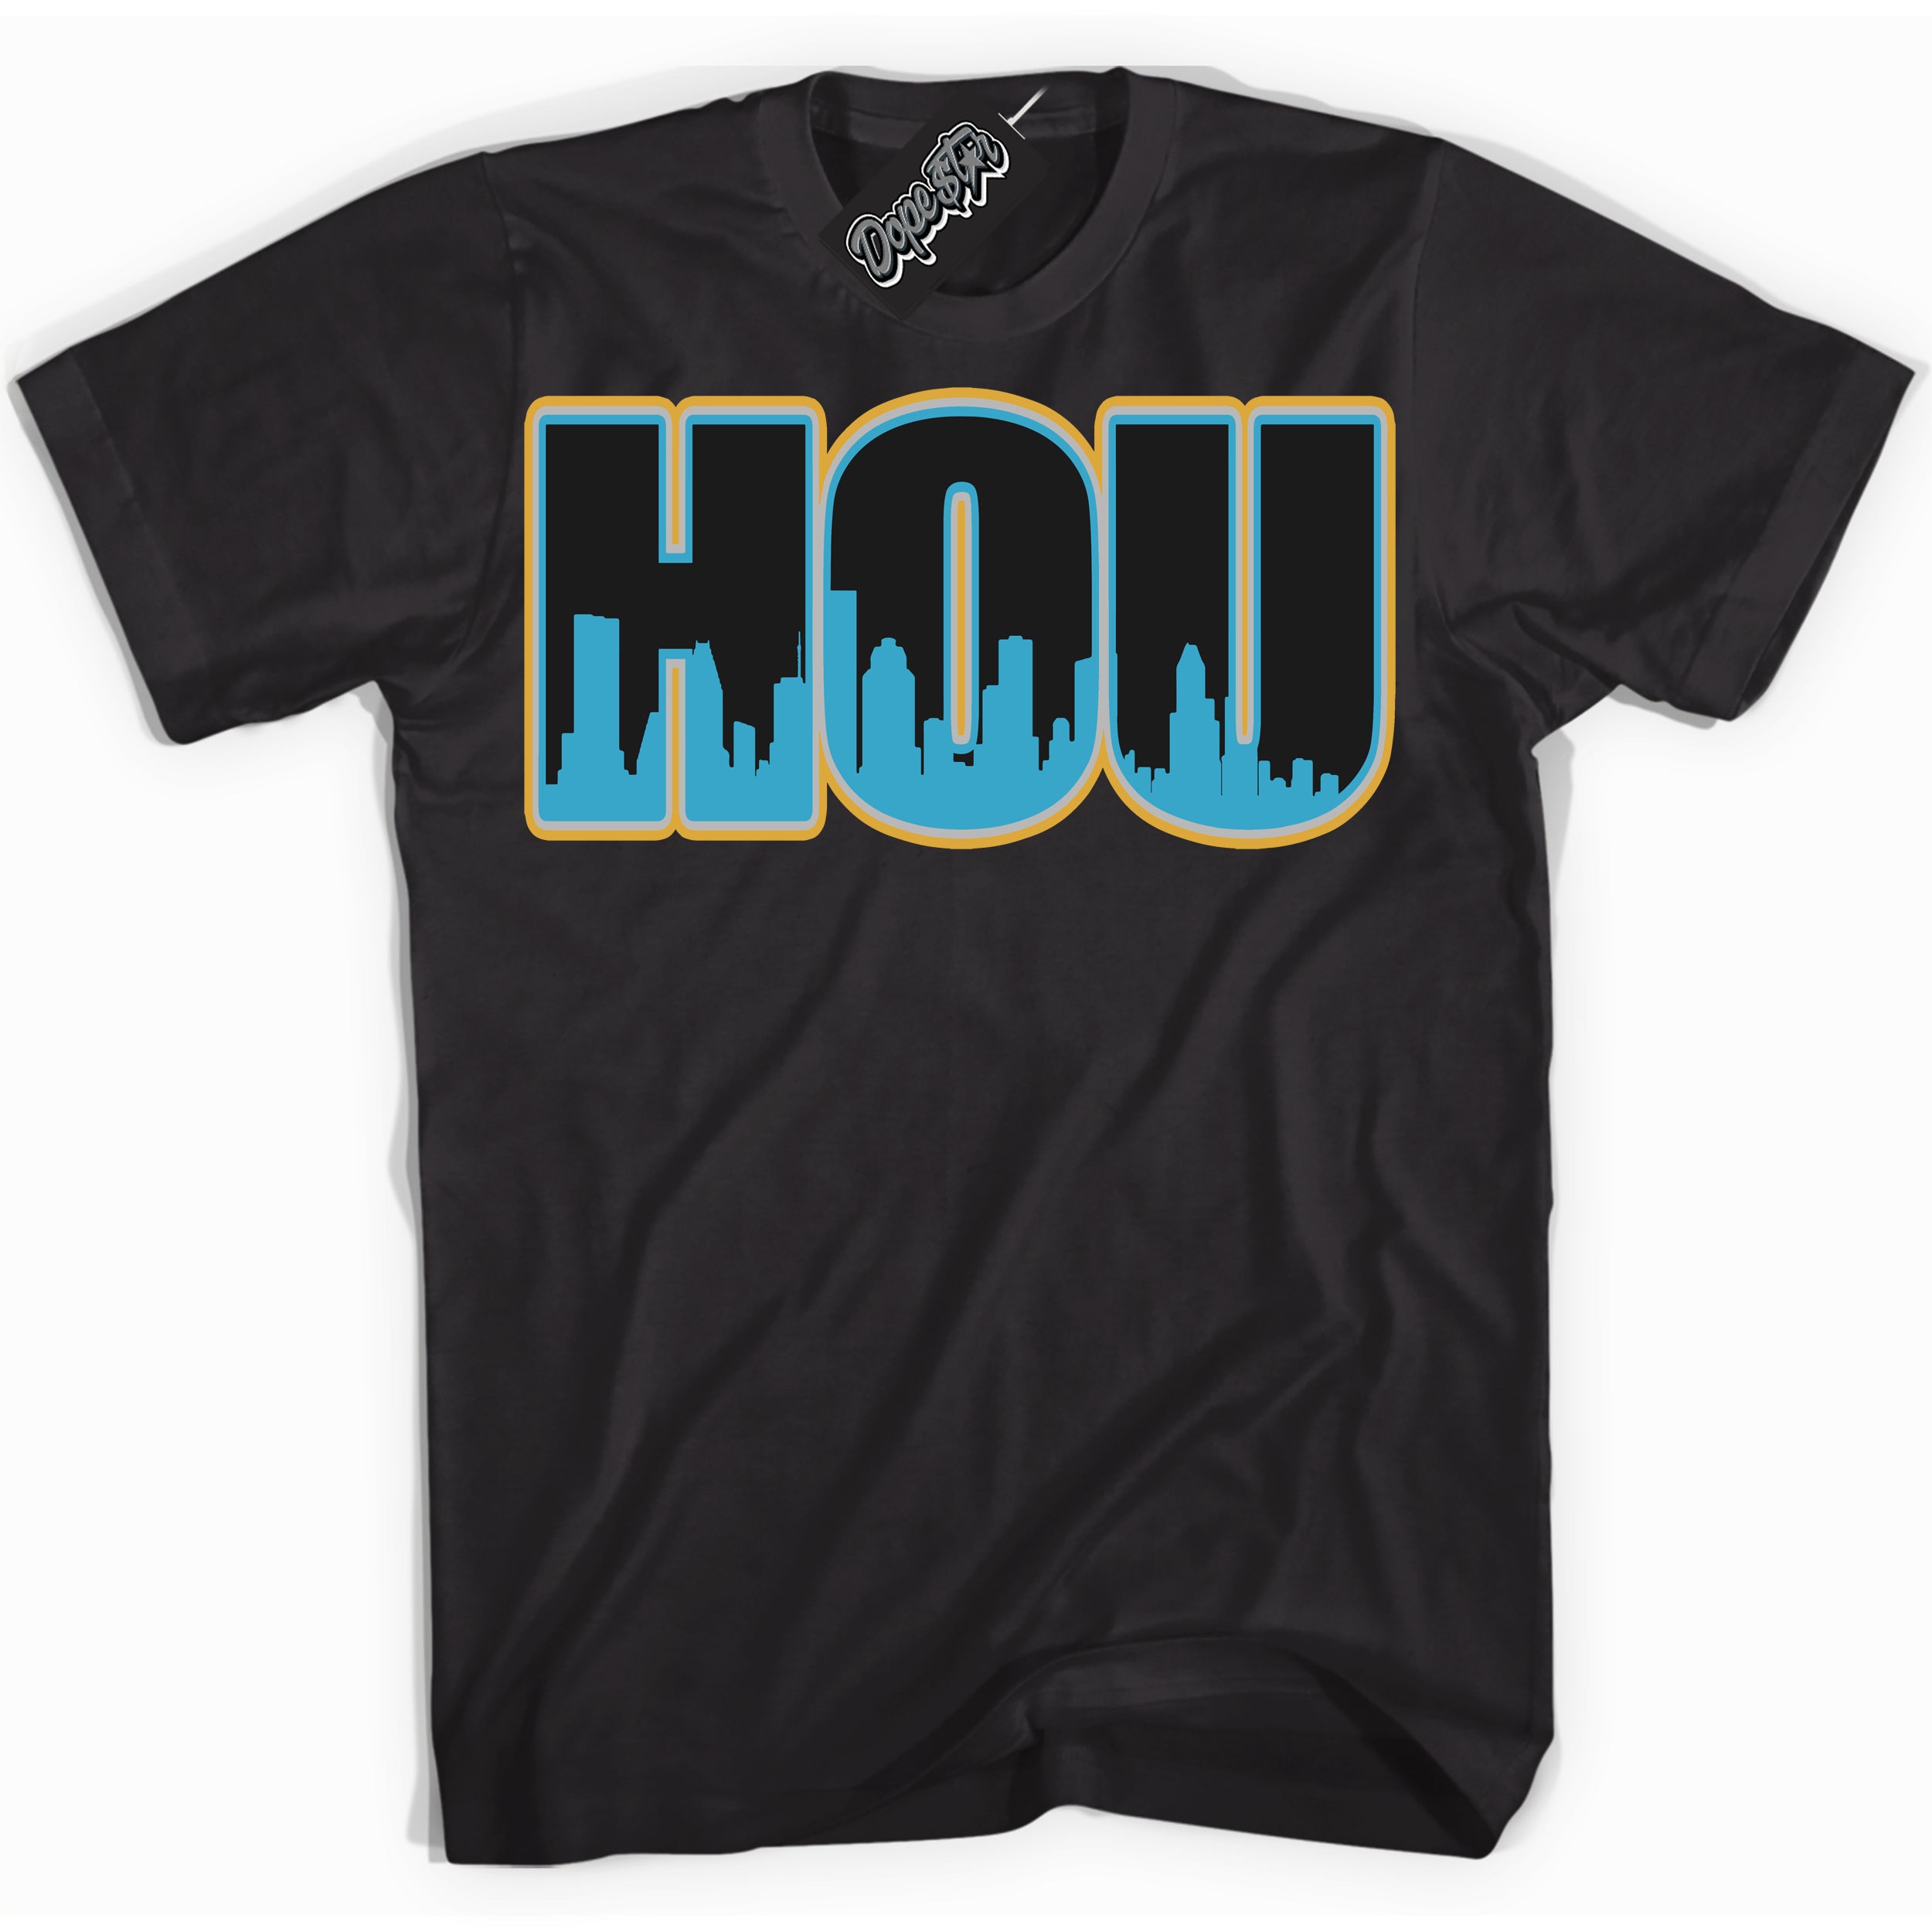 Cool Black Shirt with “ Houston” design that perfectly matches Aqua 5s Sneakers.